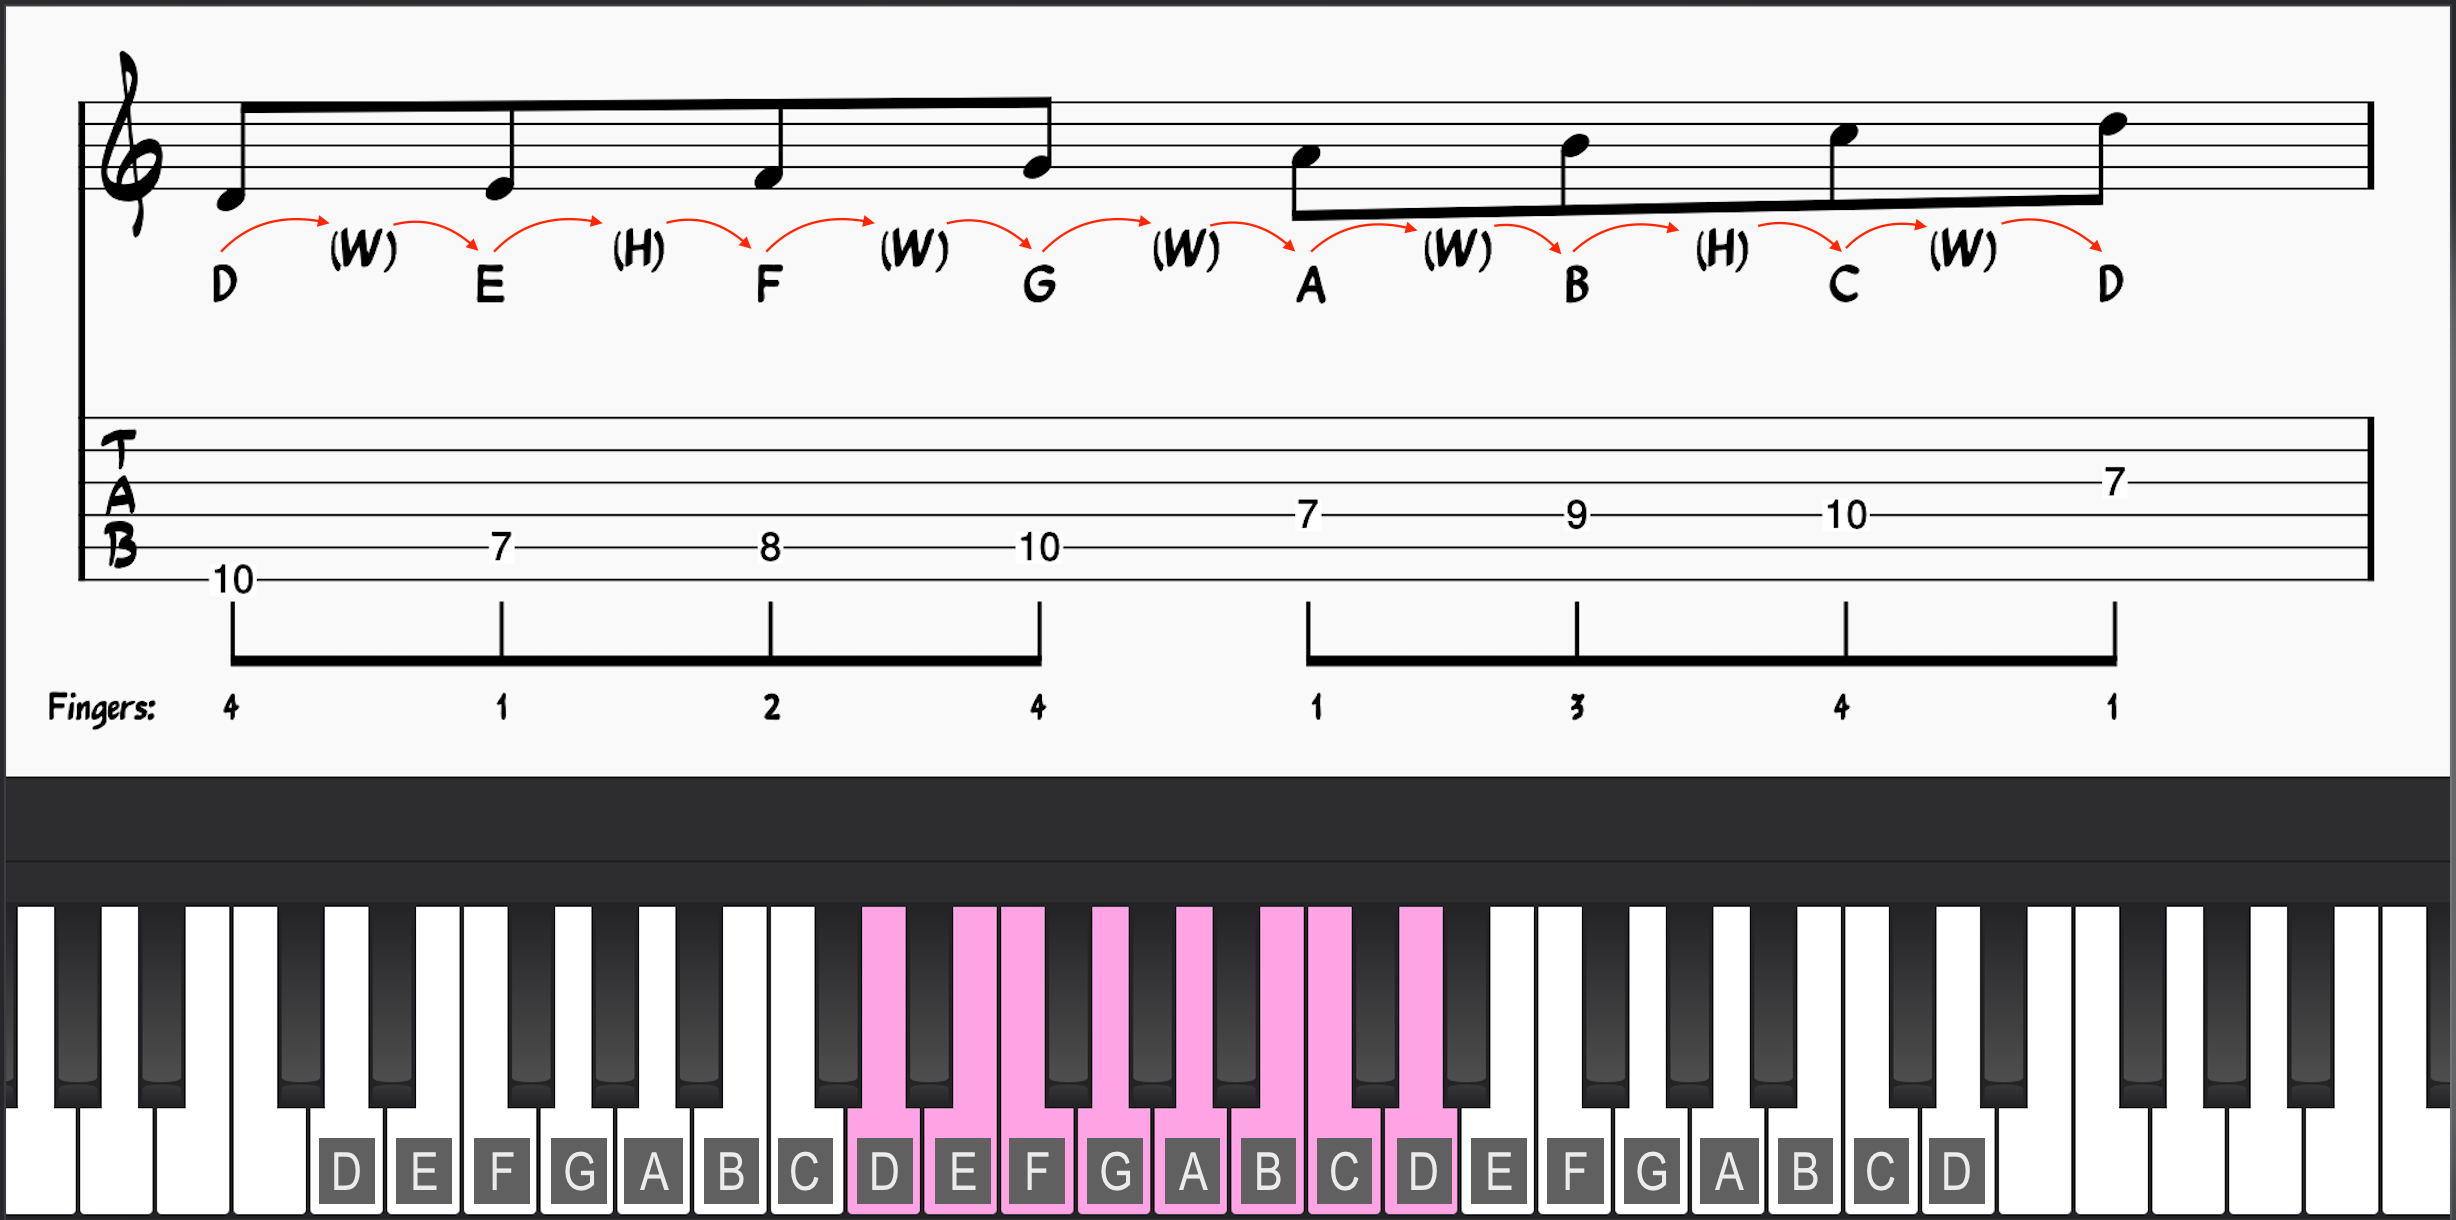 D Dorian Mode shown on piano and guitar